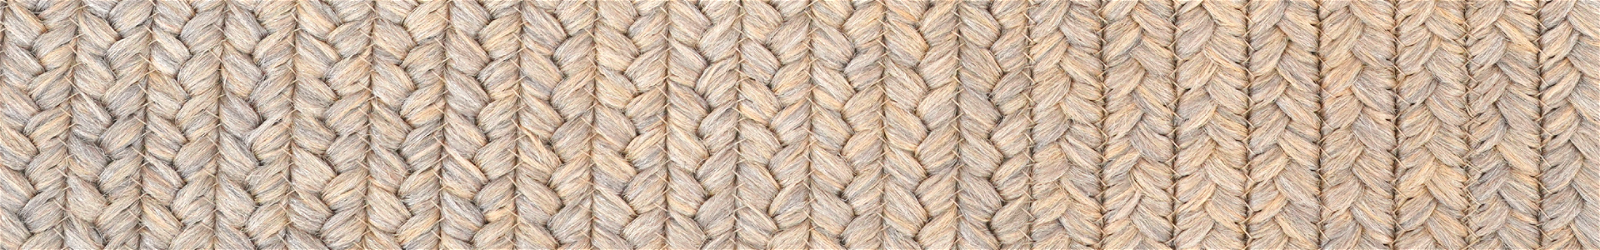 Cotton - Brown Braided Rugs